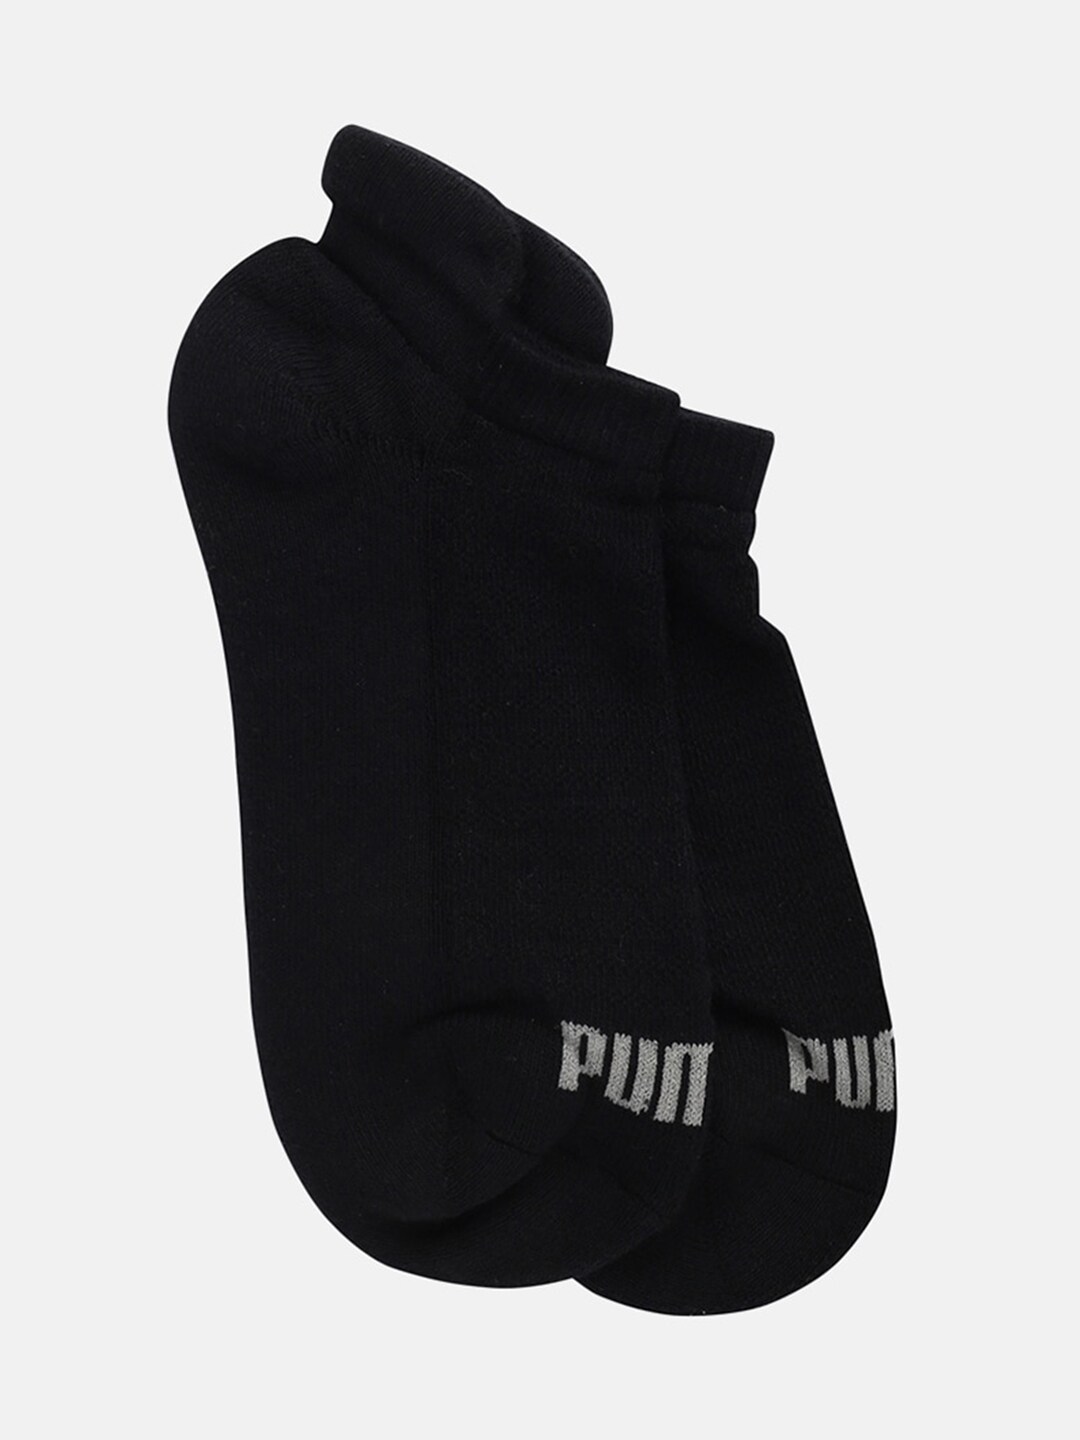 Puma Adults Black Pack of 2 Solid Ankle Length Socks Price in India